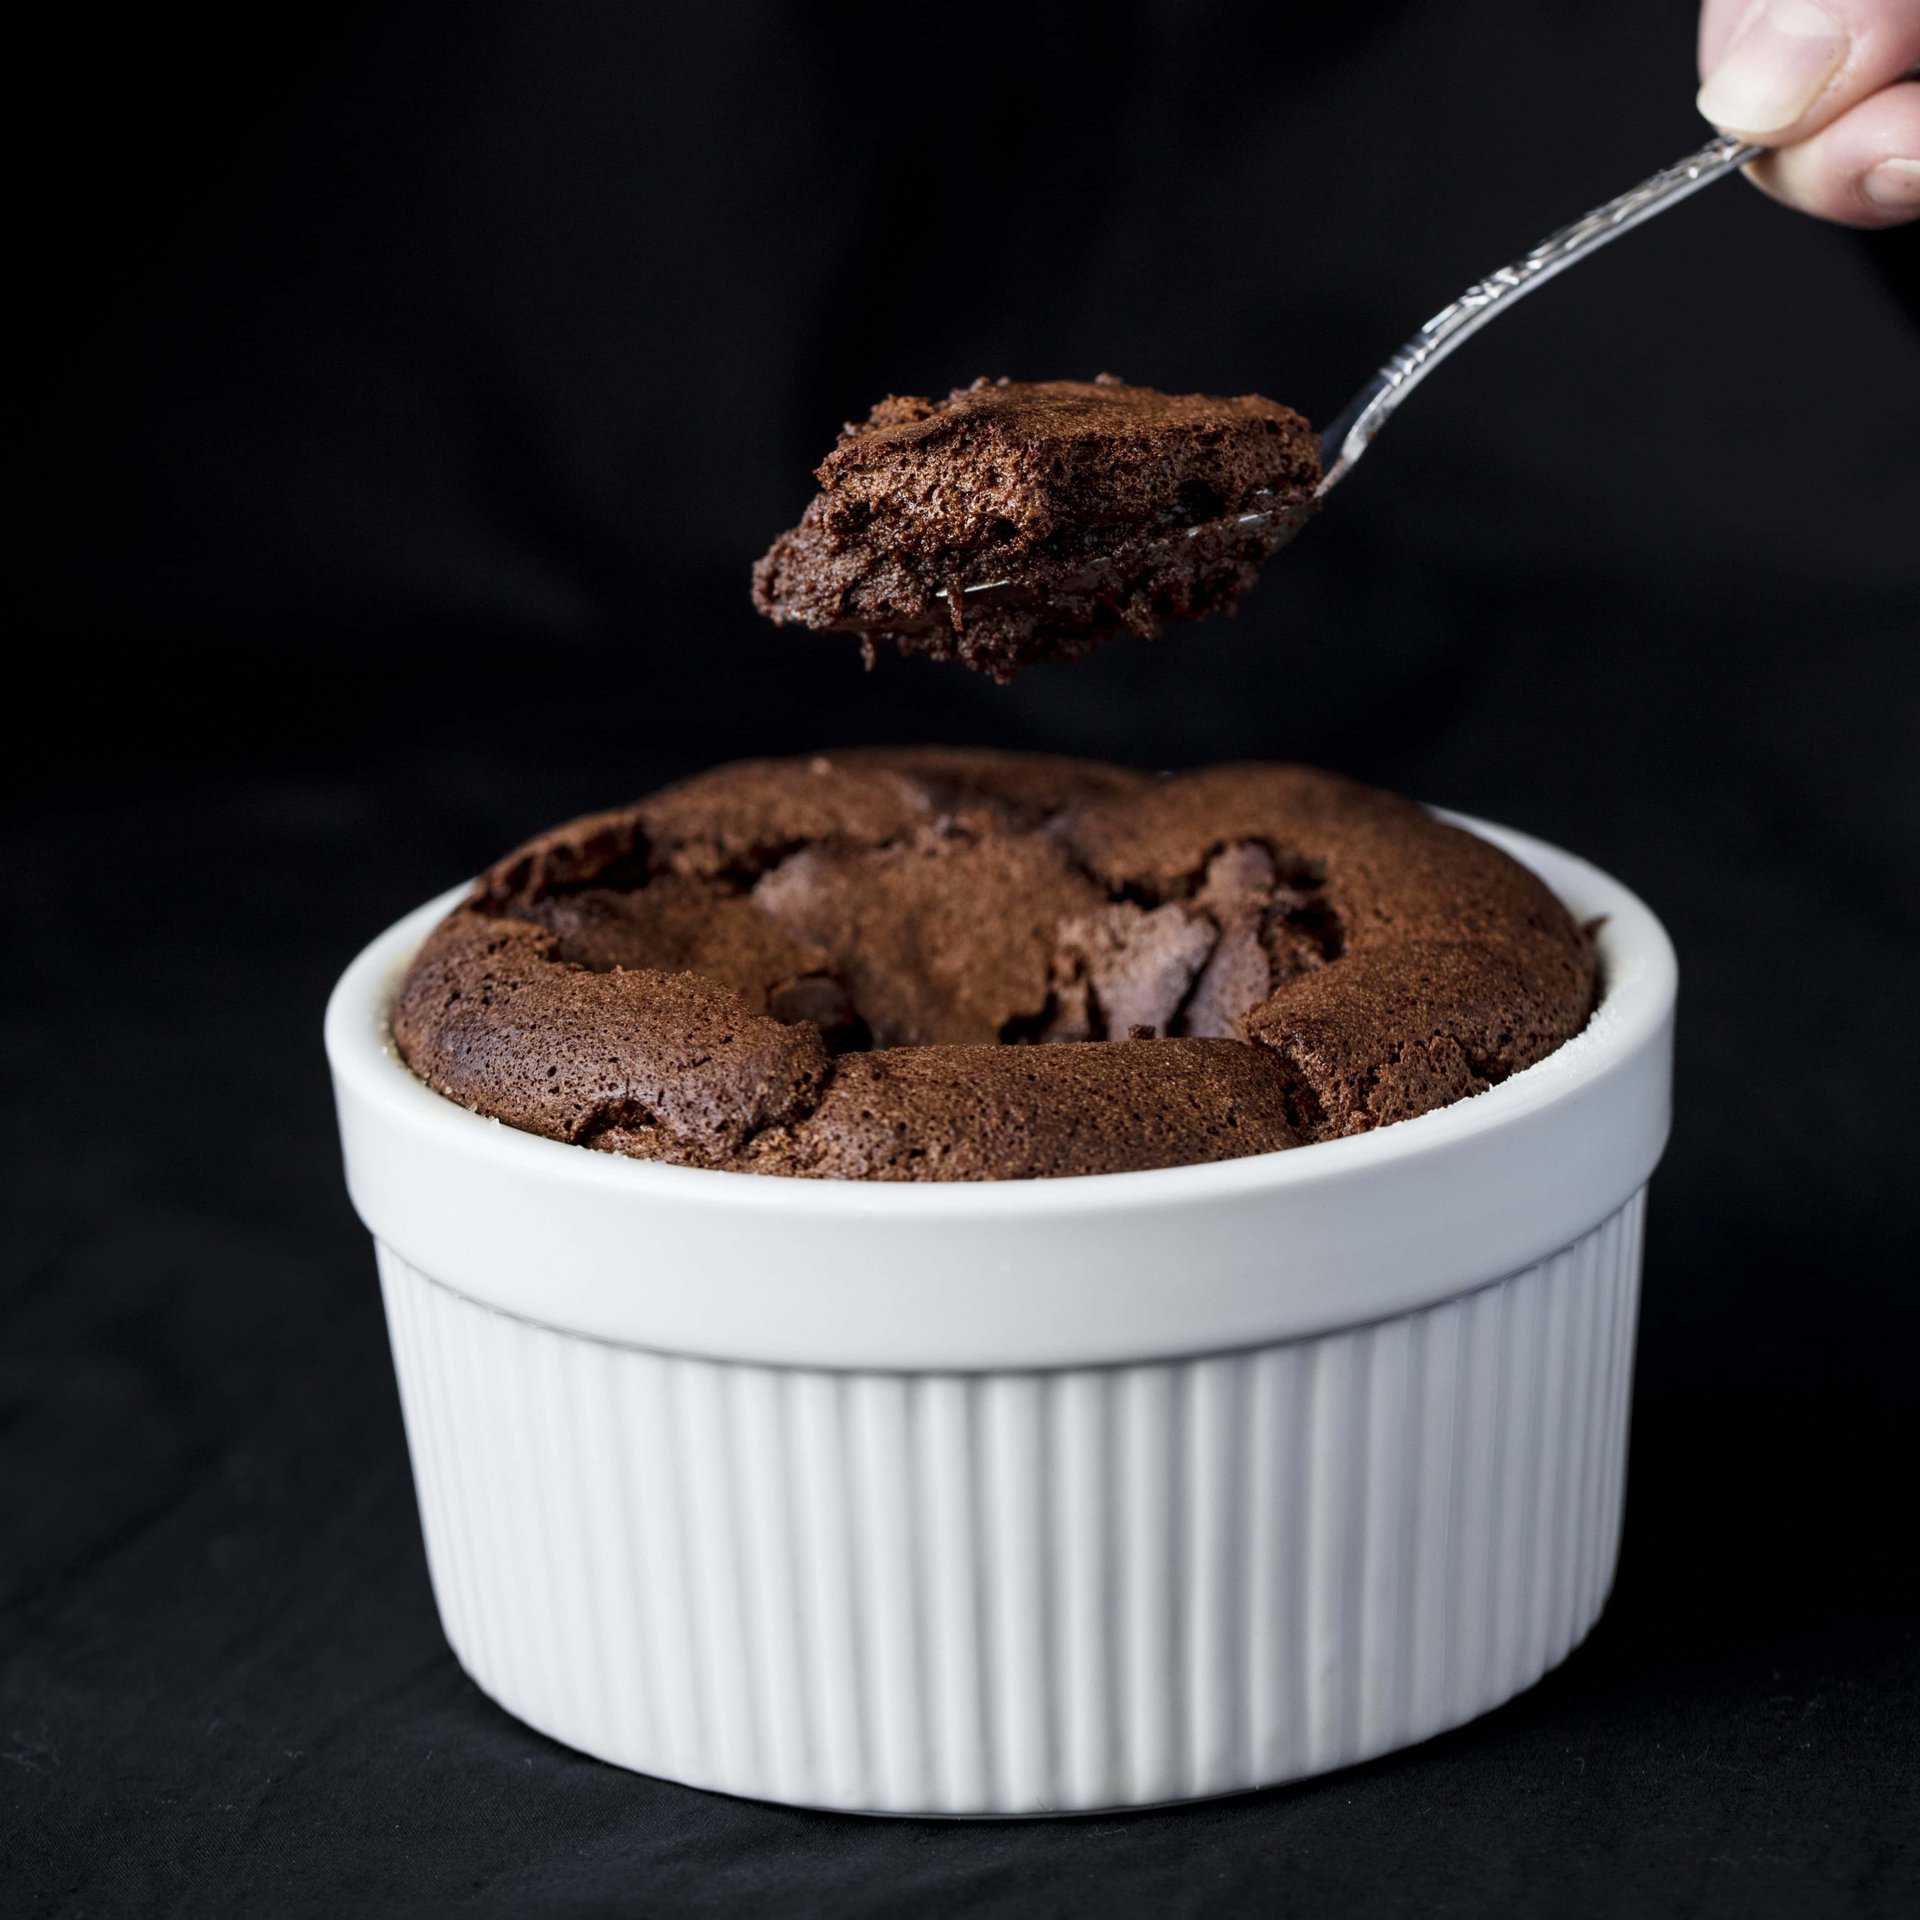 This Easy Chocolate Soufflé will make any chocolate lover swoon! Making soufflés doesn't have to be impossibly hard. You just need a good set of instructions!